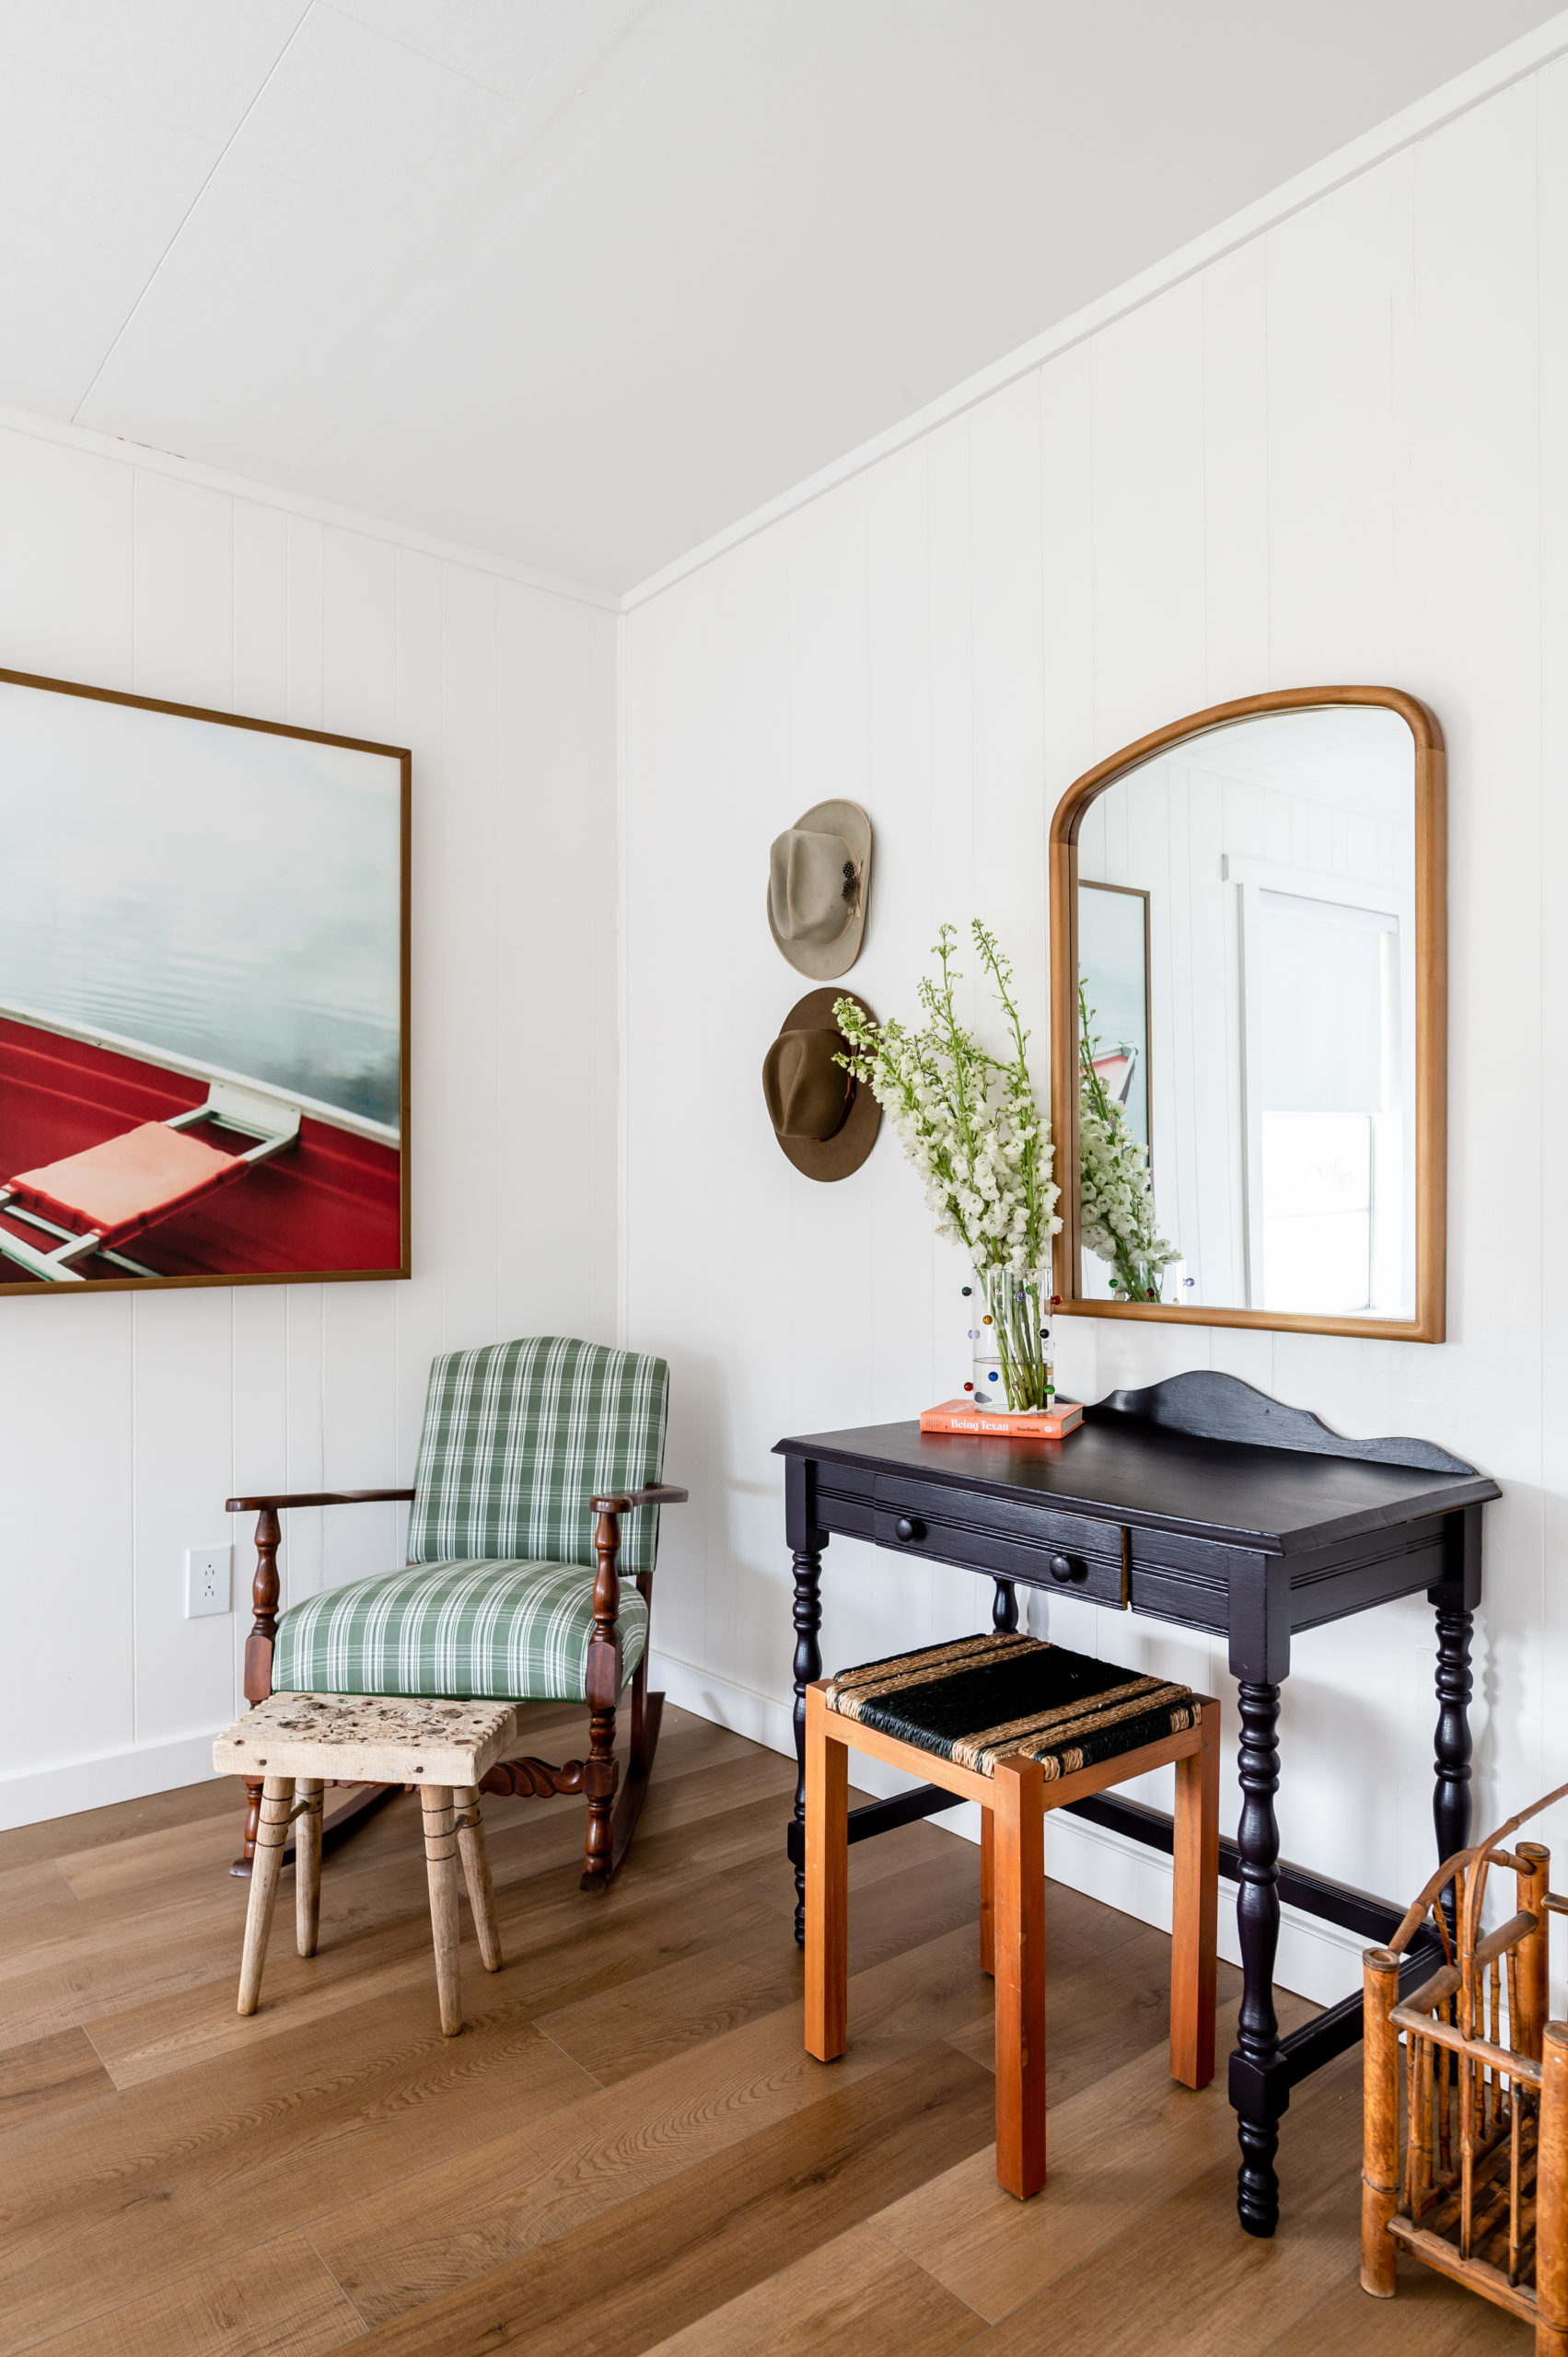 Jack’s Place short-term vacation rental from Good Day Guest House was gorgeous to capture interior photography for! I loved being able to take Airbnb photography for every detail of the home.